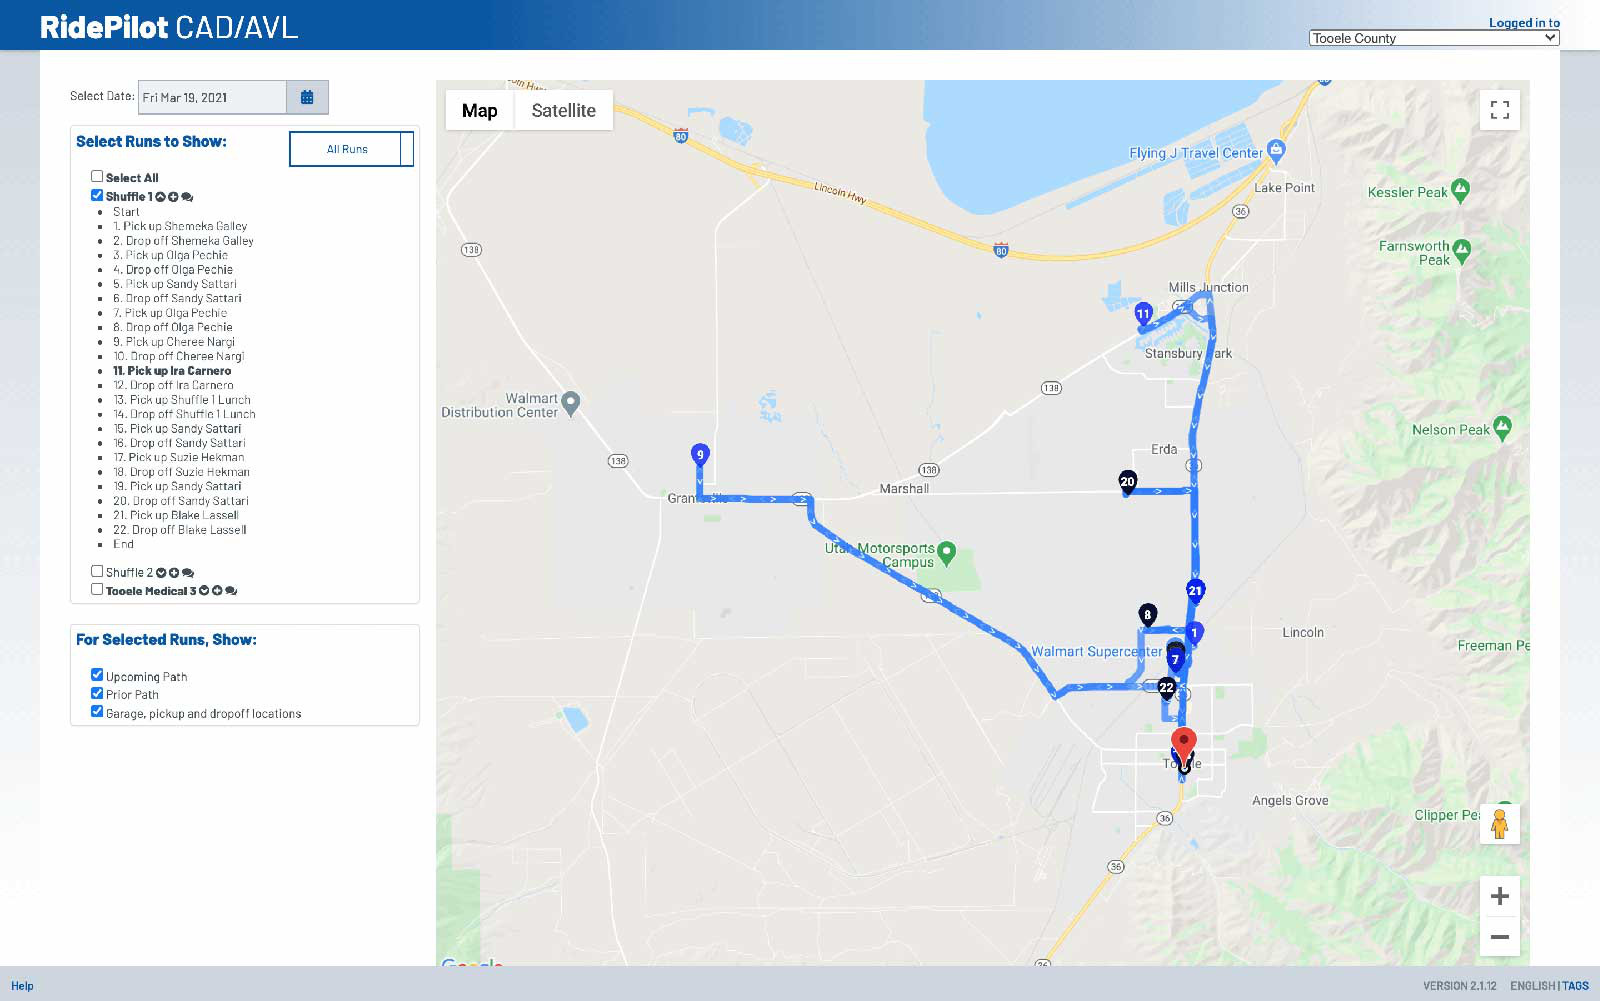 Computer-Aided Dispatch/Automatic Vehicle Location functionality: RidePilot shows the series of scheduled pickups and drop-offs that a vehicle makes through the course of a run.